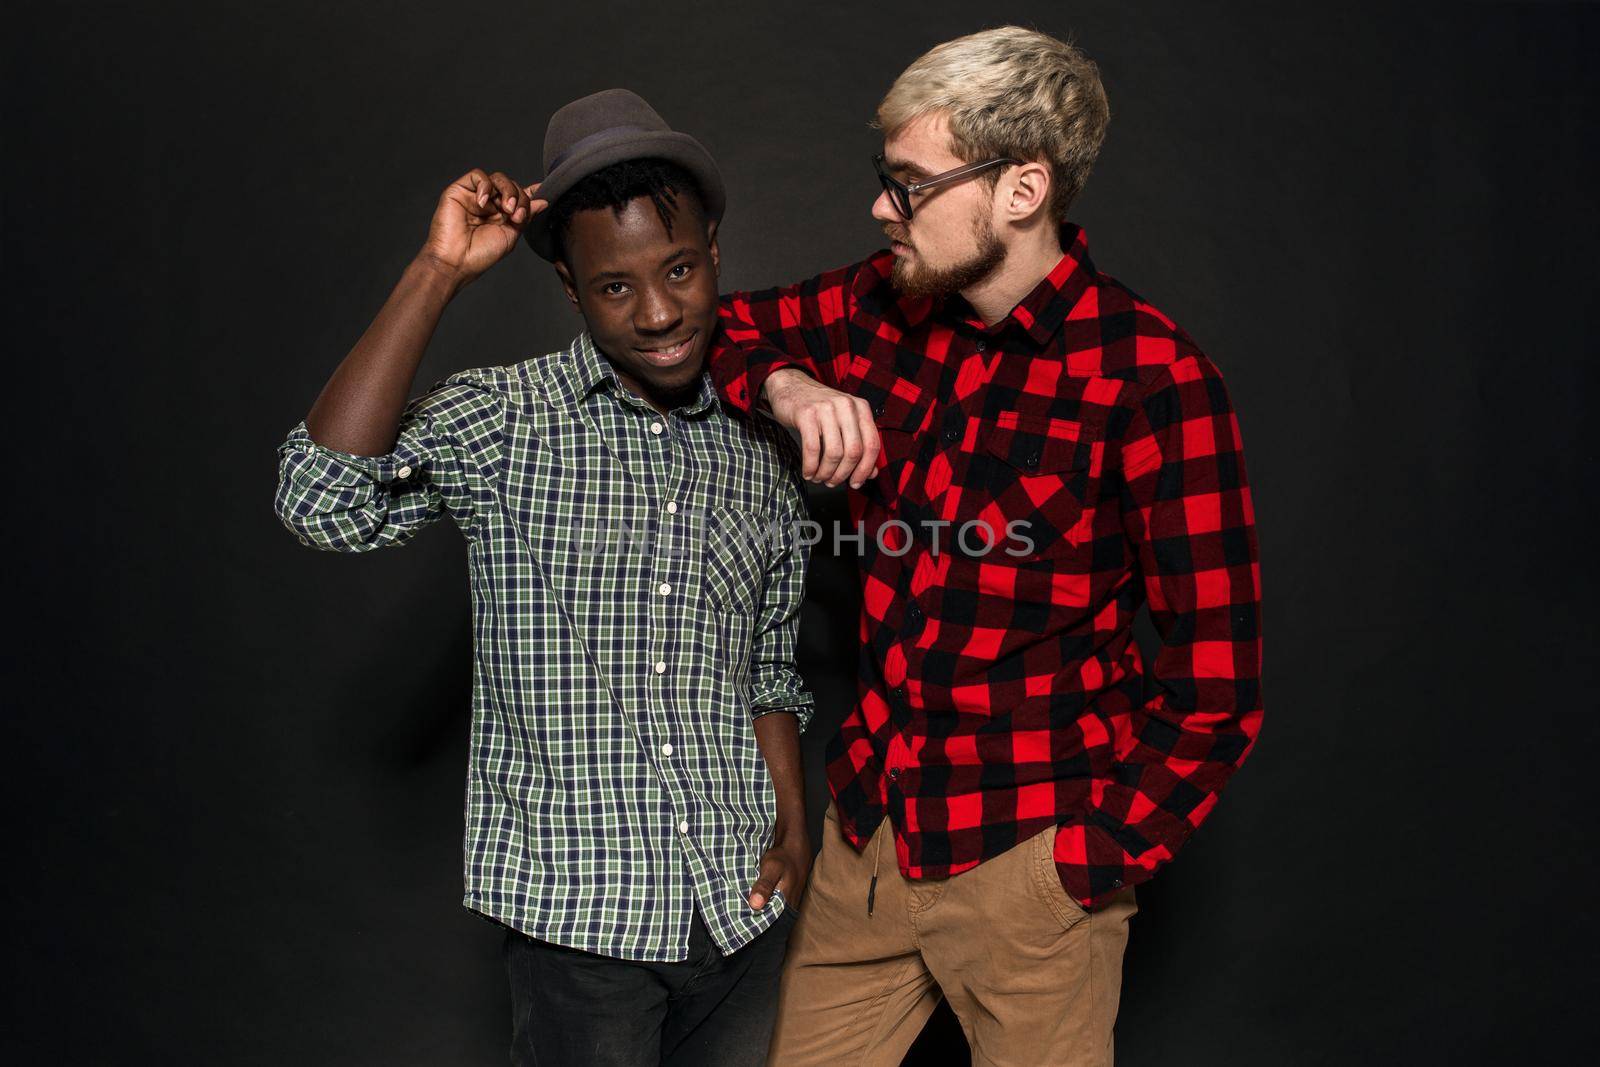 Studio lifestyle portrait of two best friends hipster boys going crazy and having great time together. On black background. by nazarovsergey